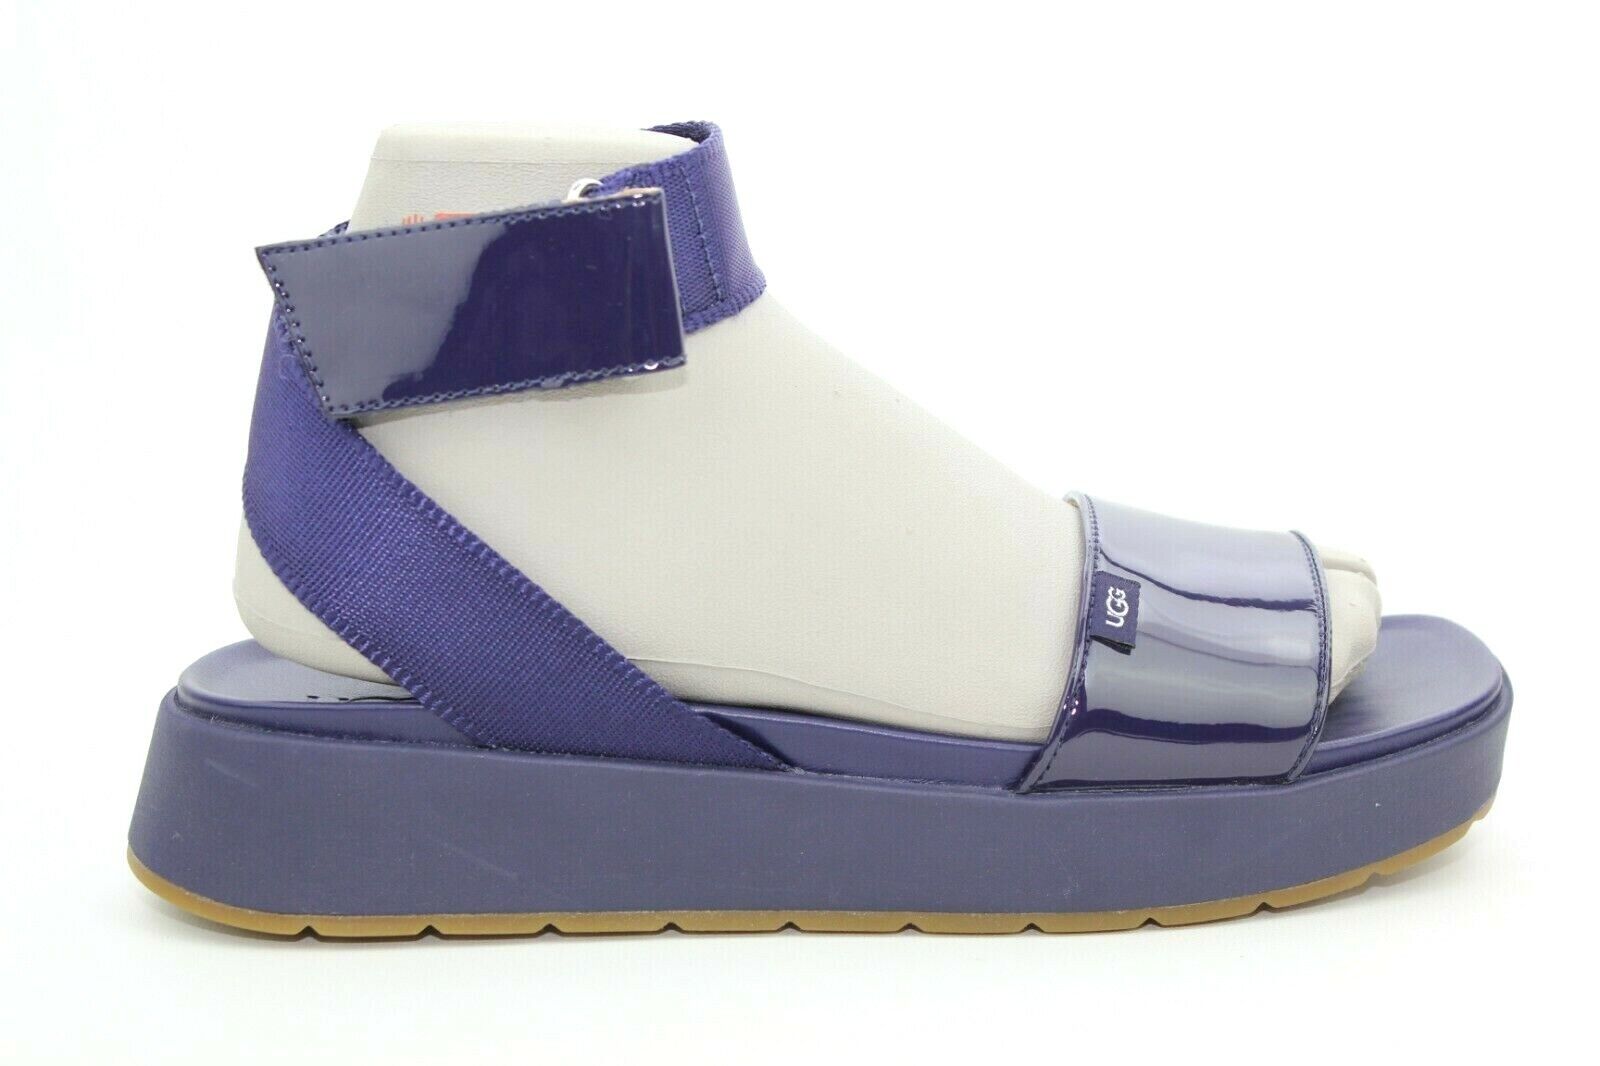 UGG LENNOX Ranking TOP5 STARRY NIGHT SYNTHETIC LEATHER PATENT New Shipping Free 9 SIZE SANDALS